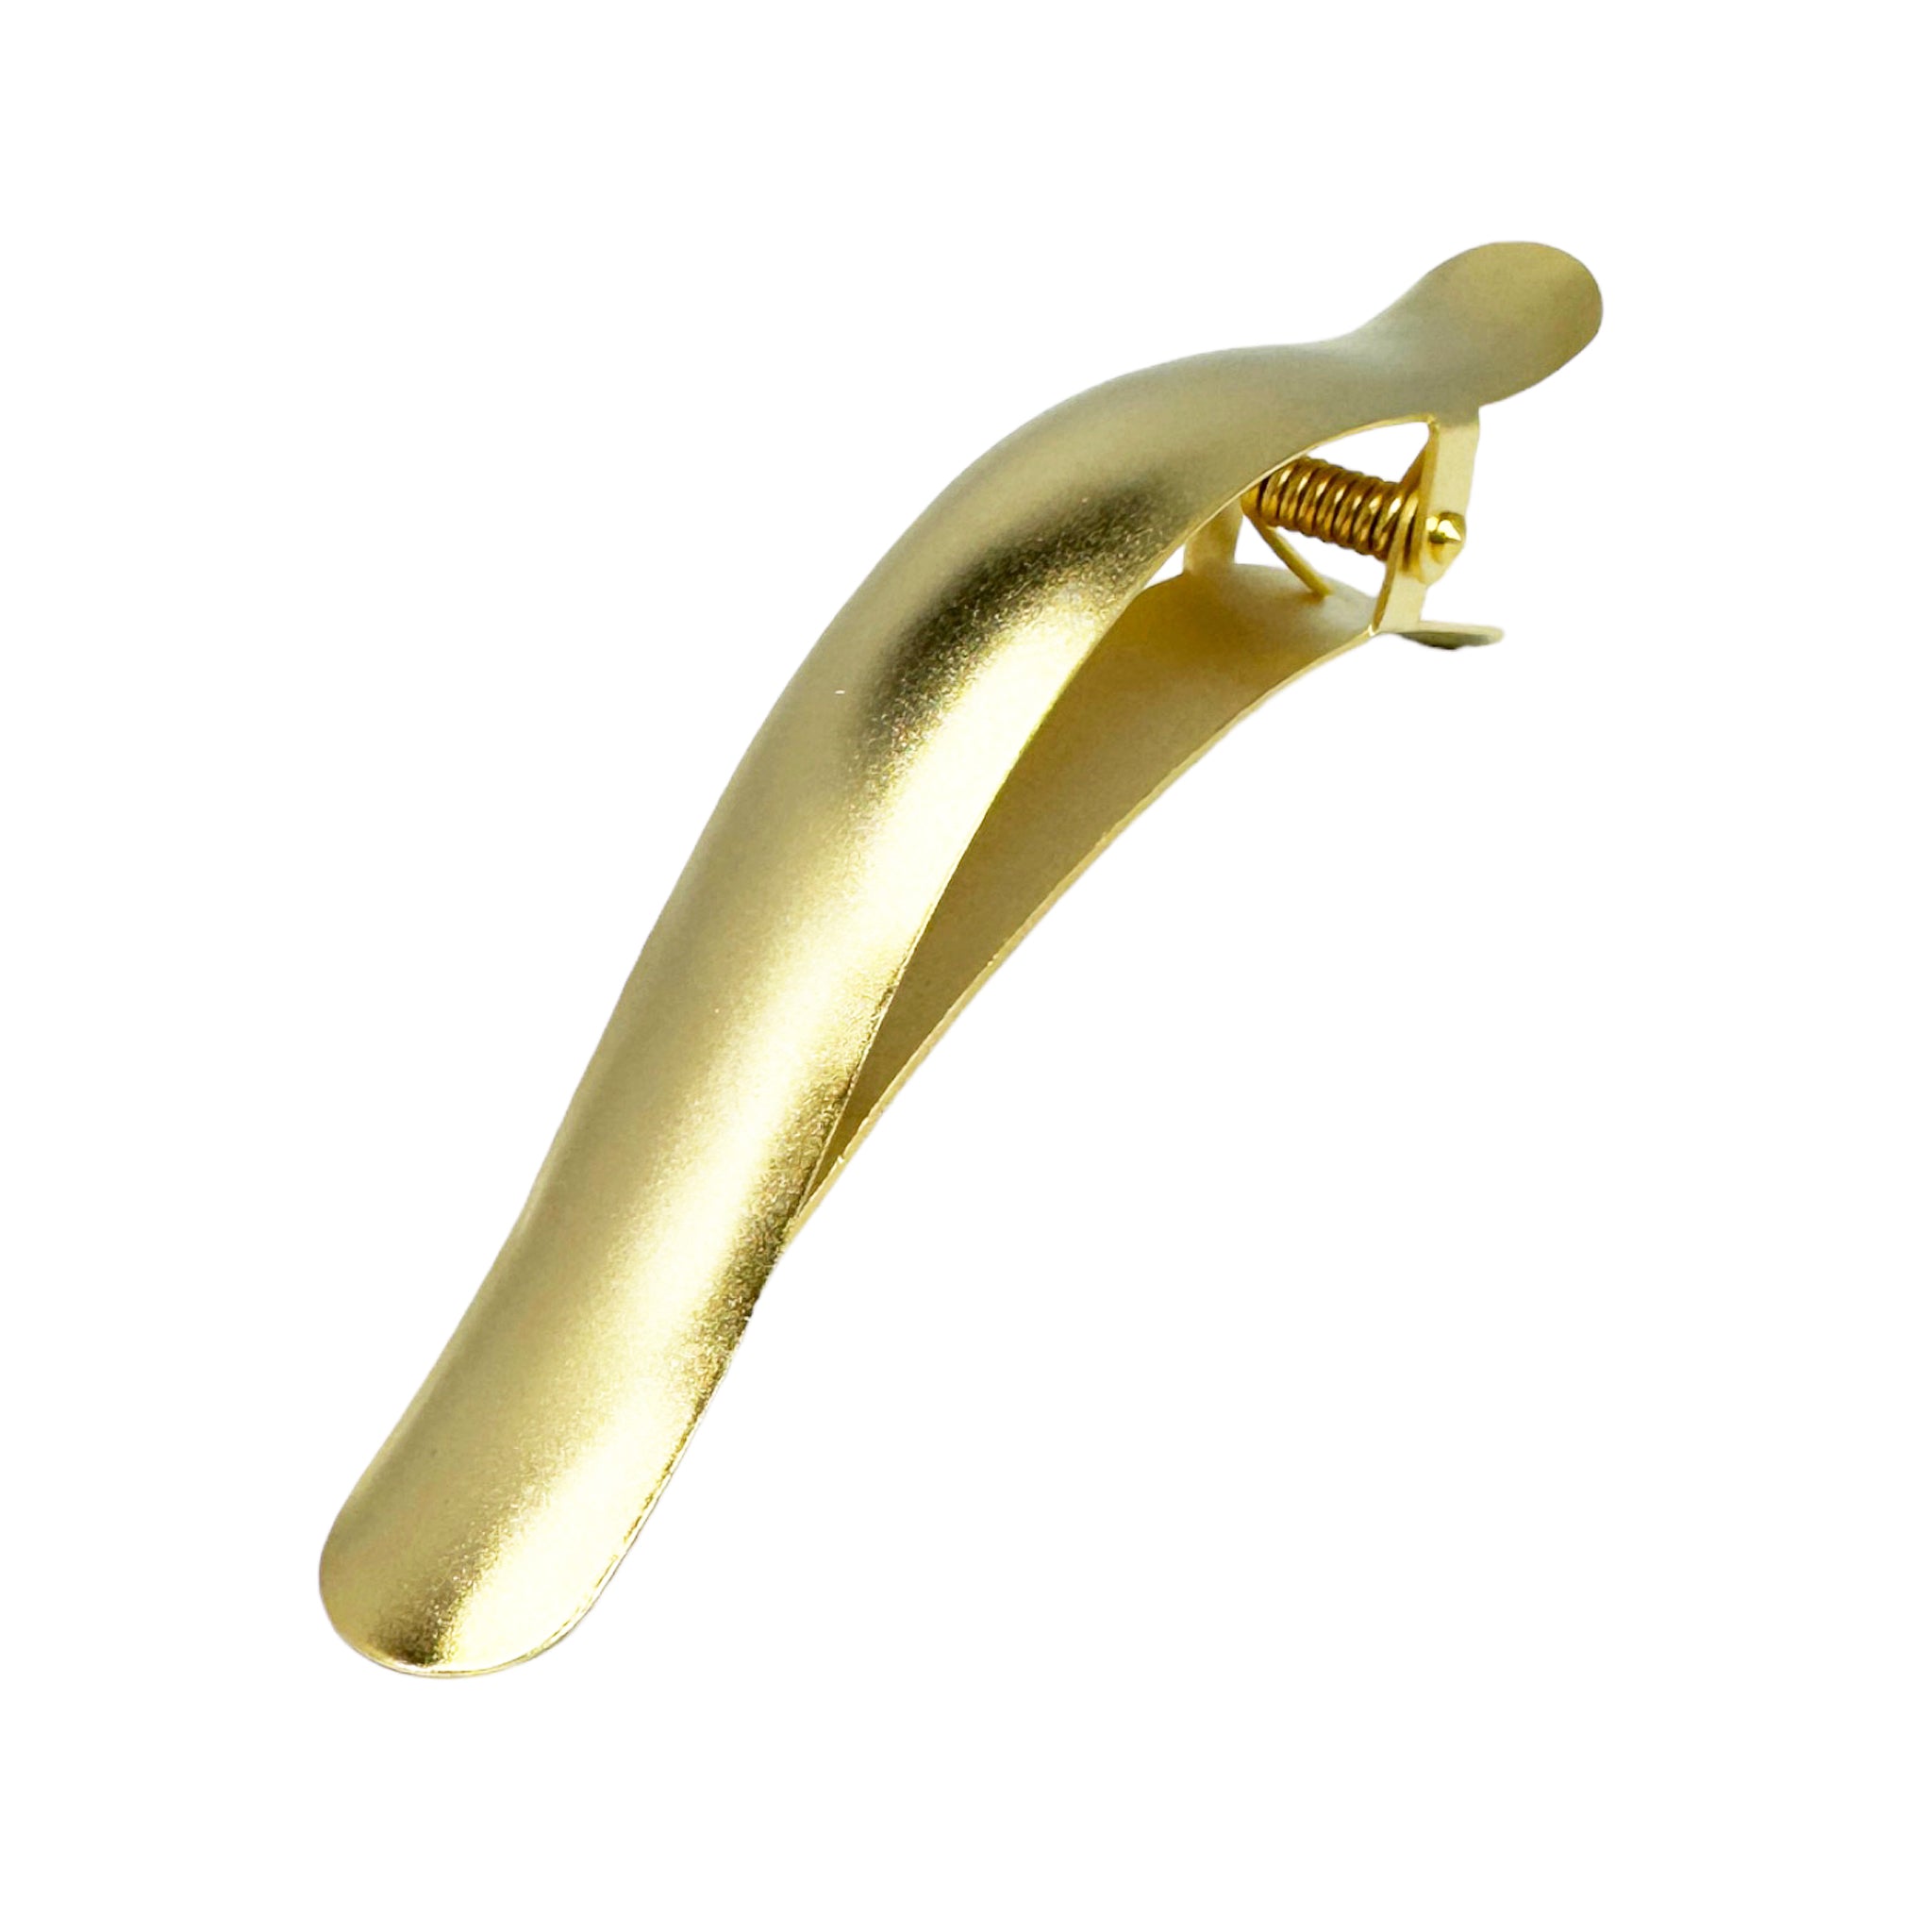 Ficcare Ficcarissimo Hair Clip in Matte Gold